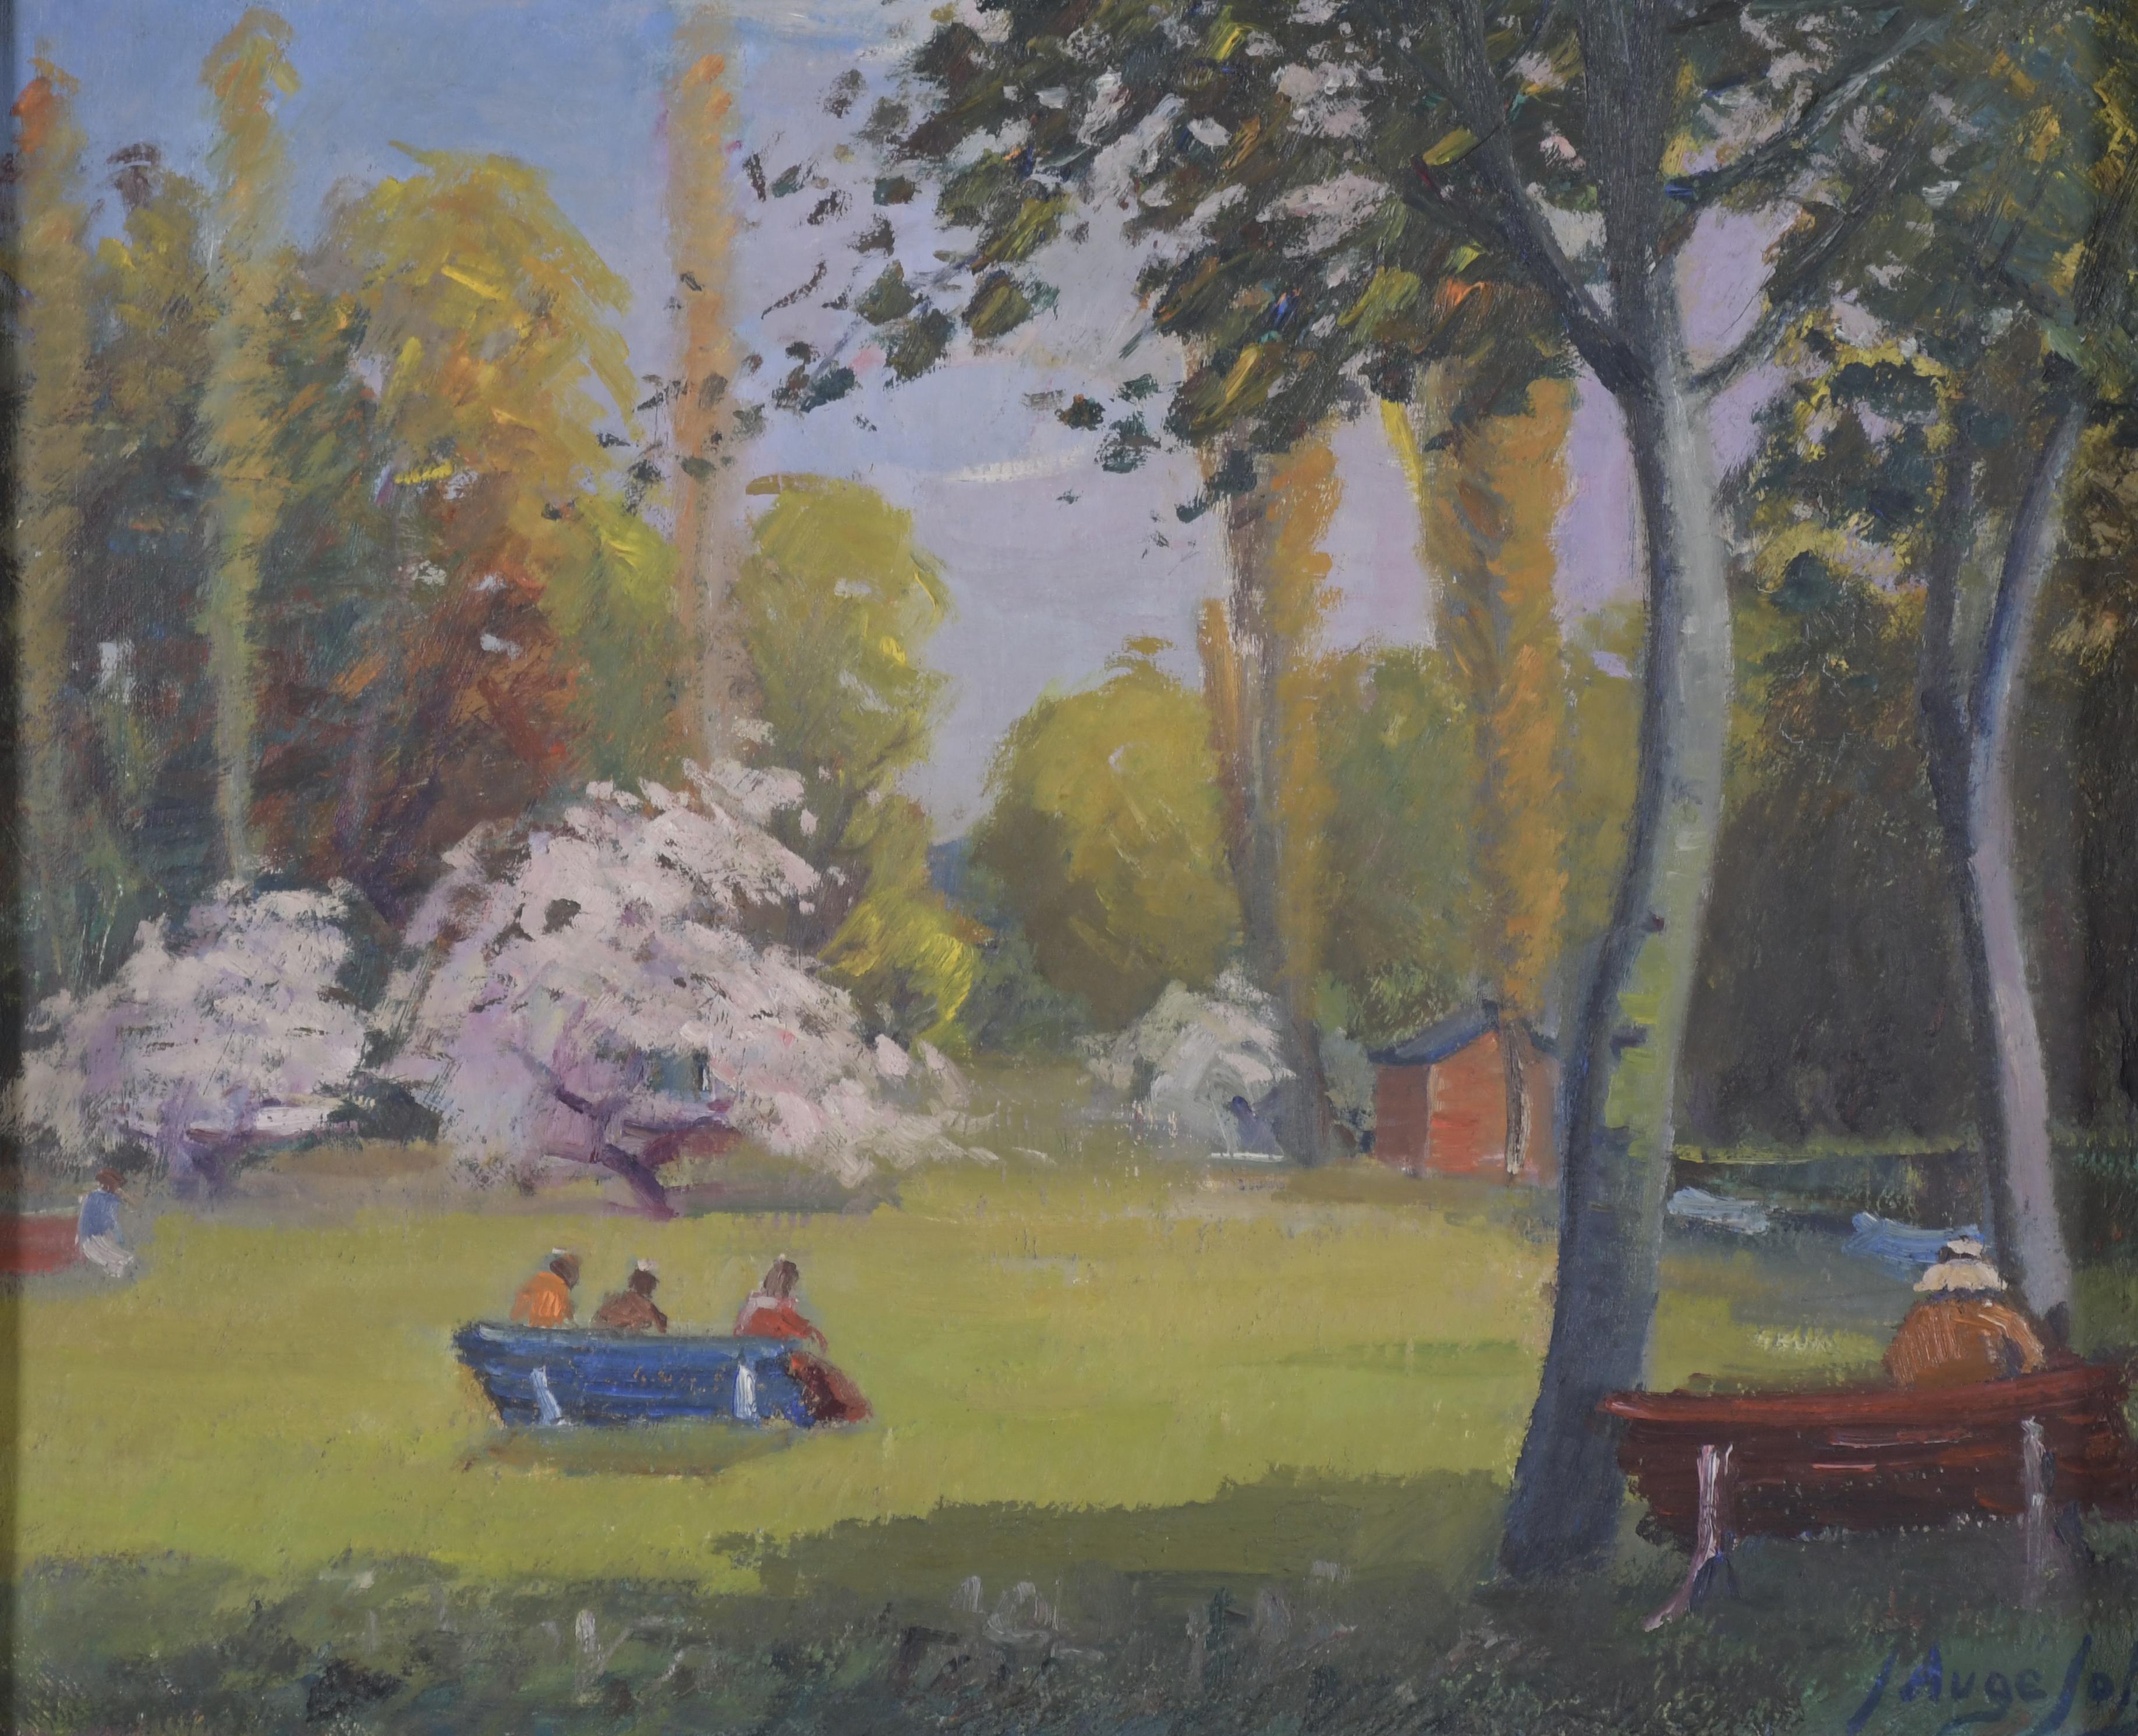 M. AUGÉ "AFTERNOON IN THE PARK".